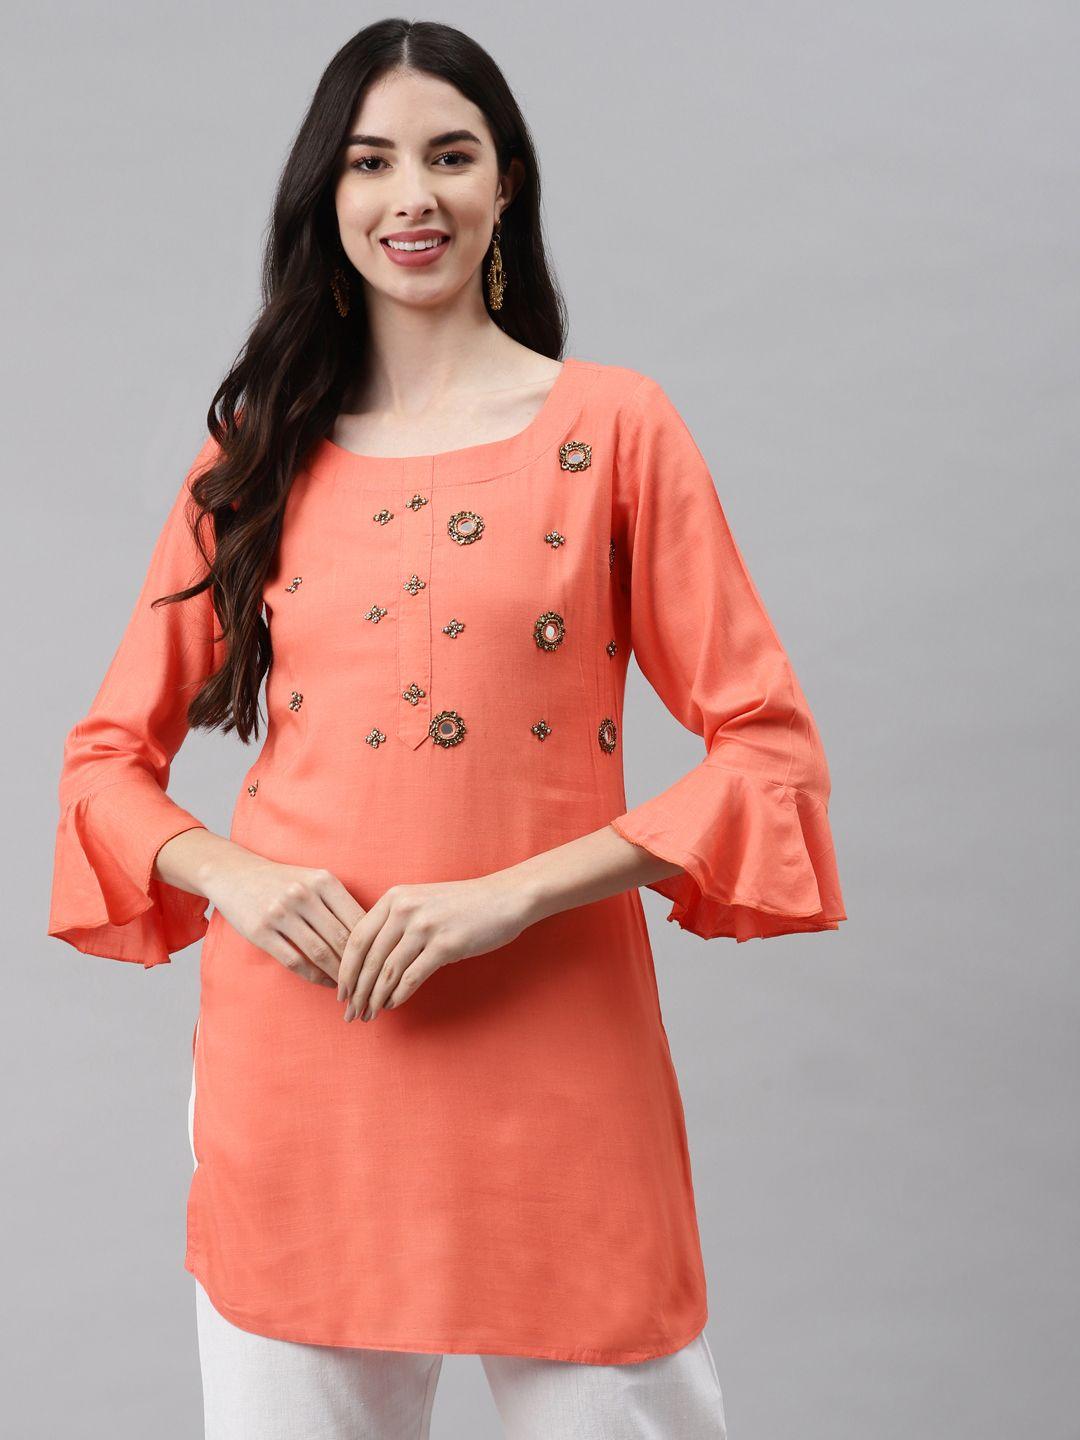 highlight-fashion-export-peach-coloured-embellished-regular-top